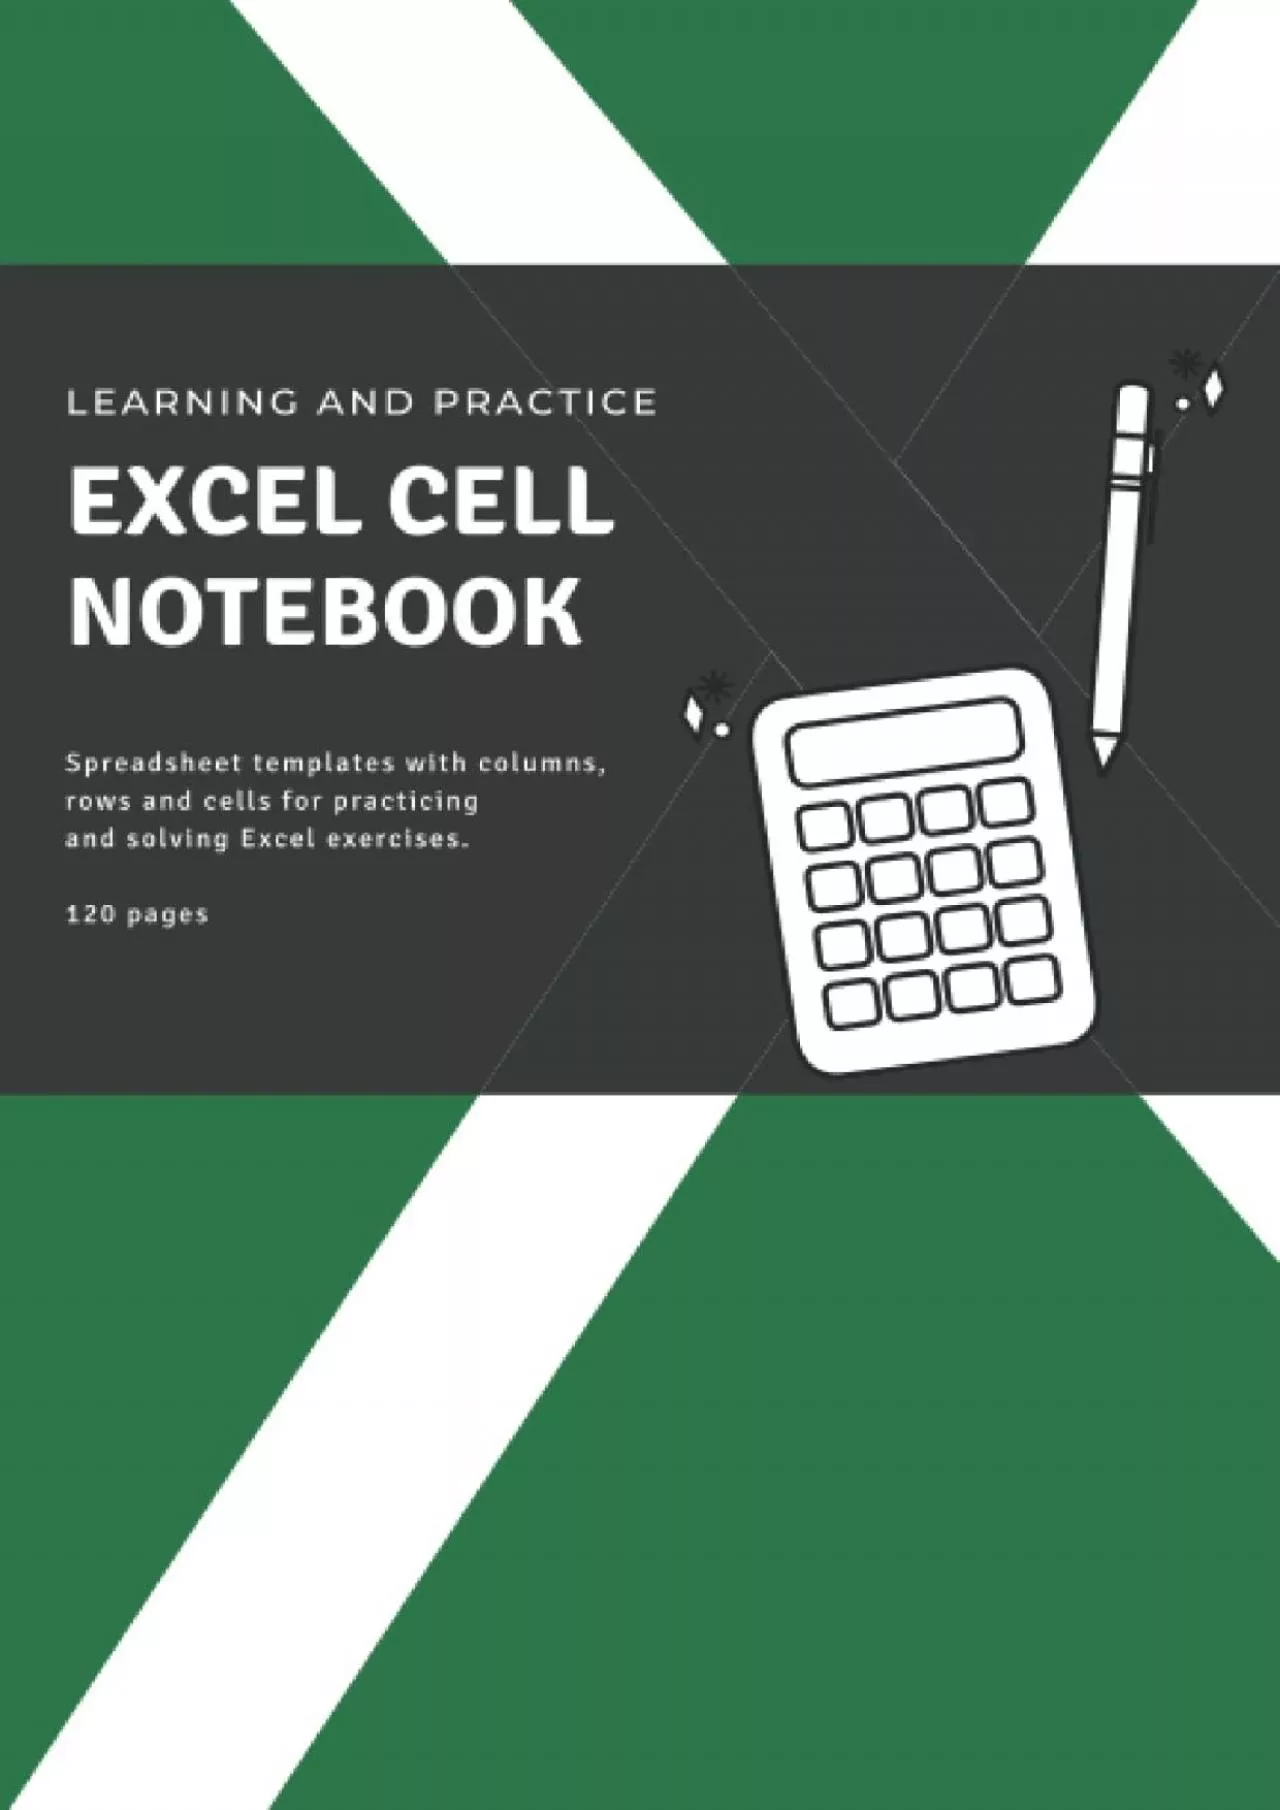 (BOOK)-Excel cell notebook: Spreadsheet templates with columns, rows and cells for practicing